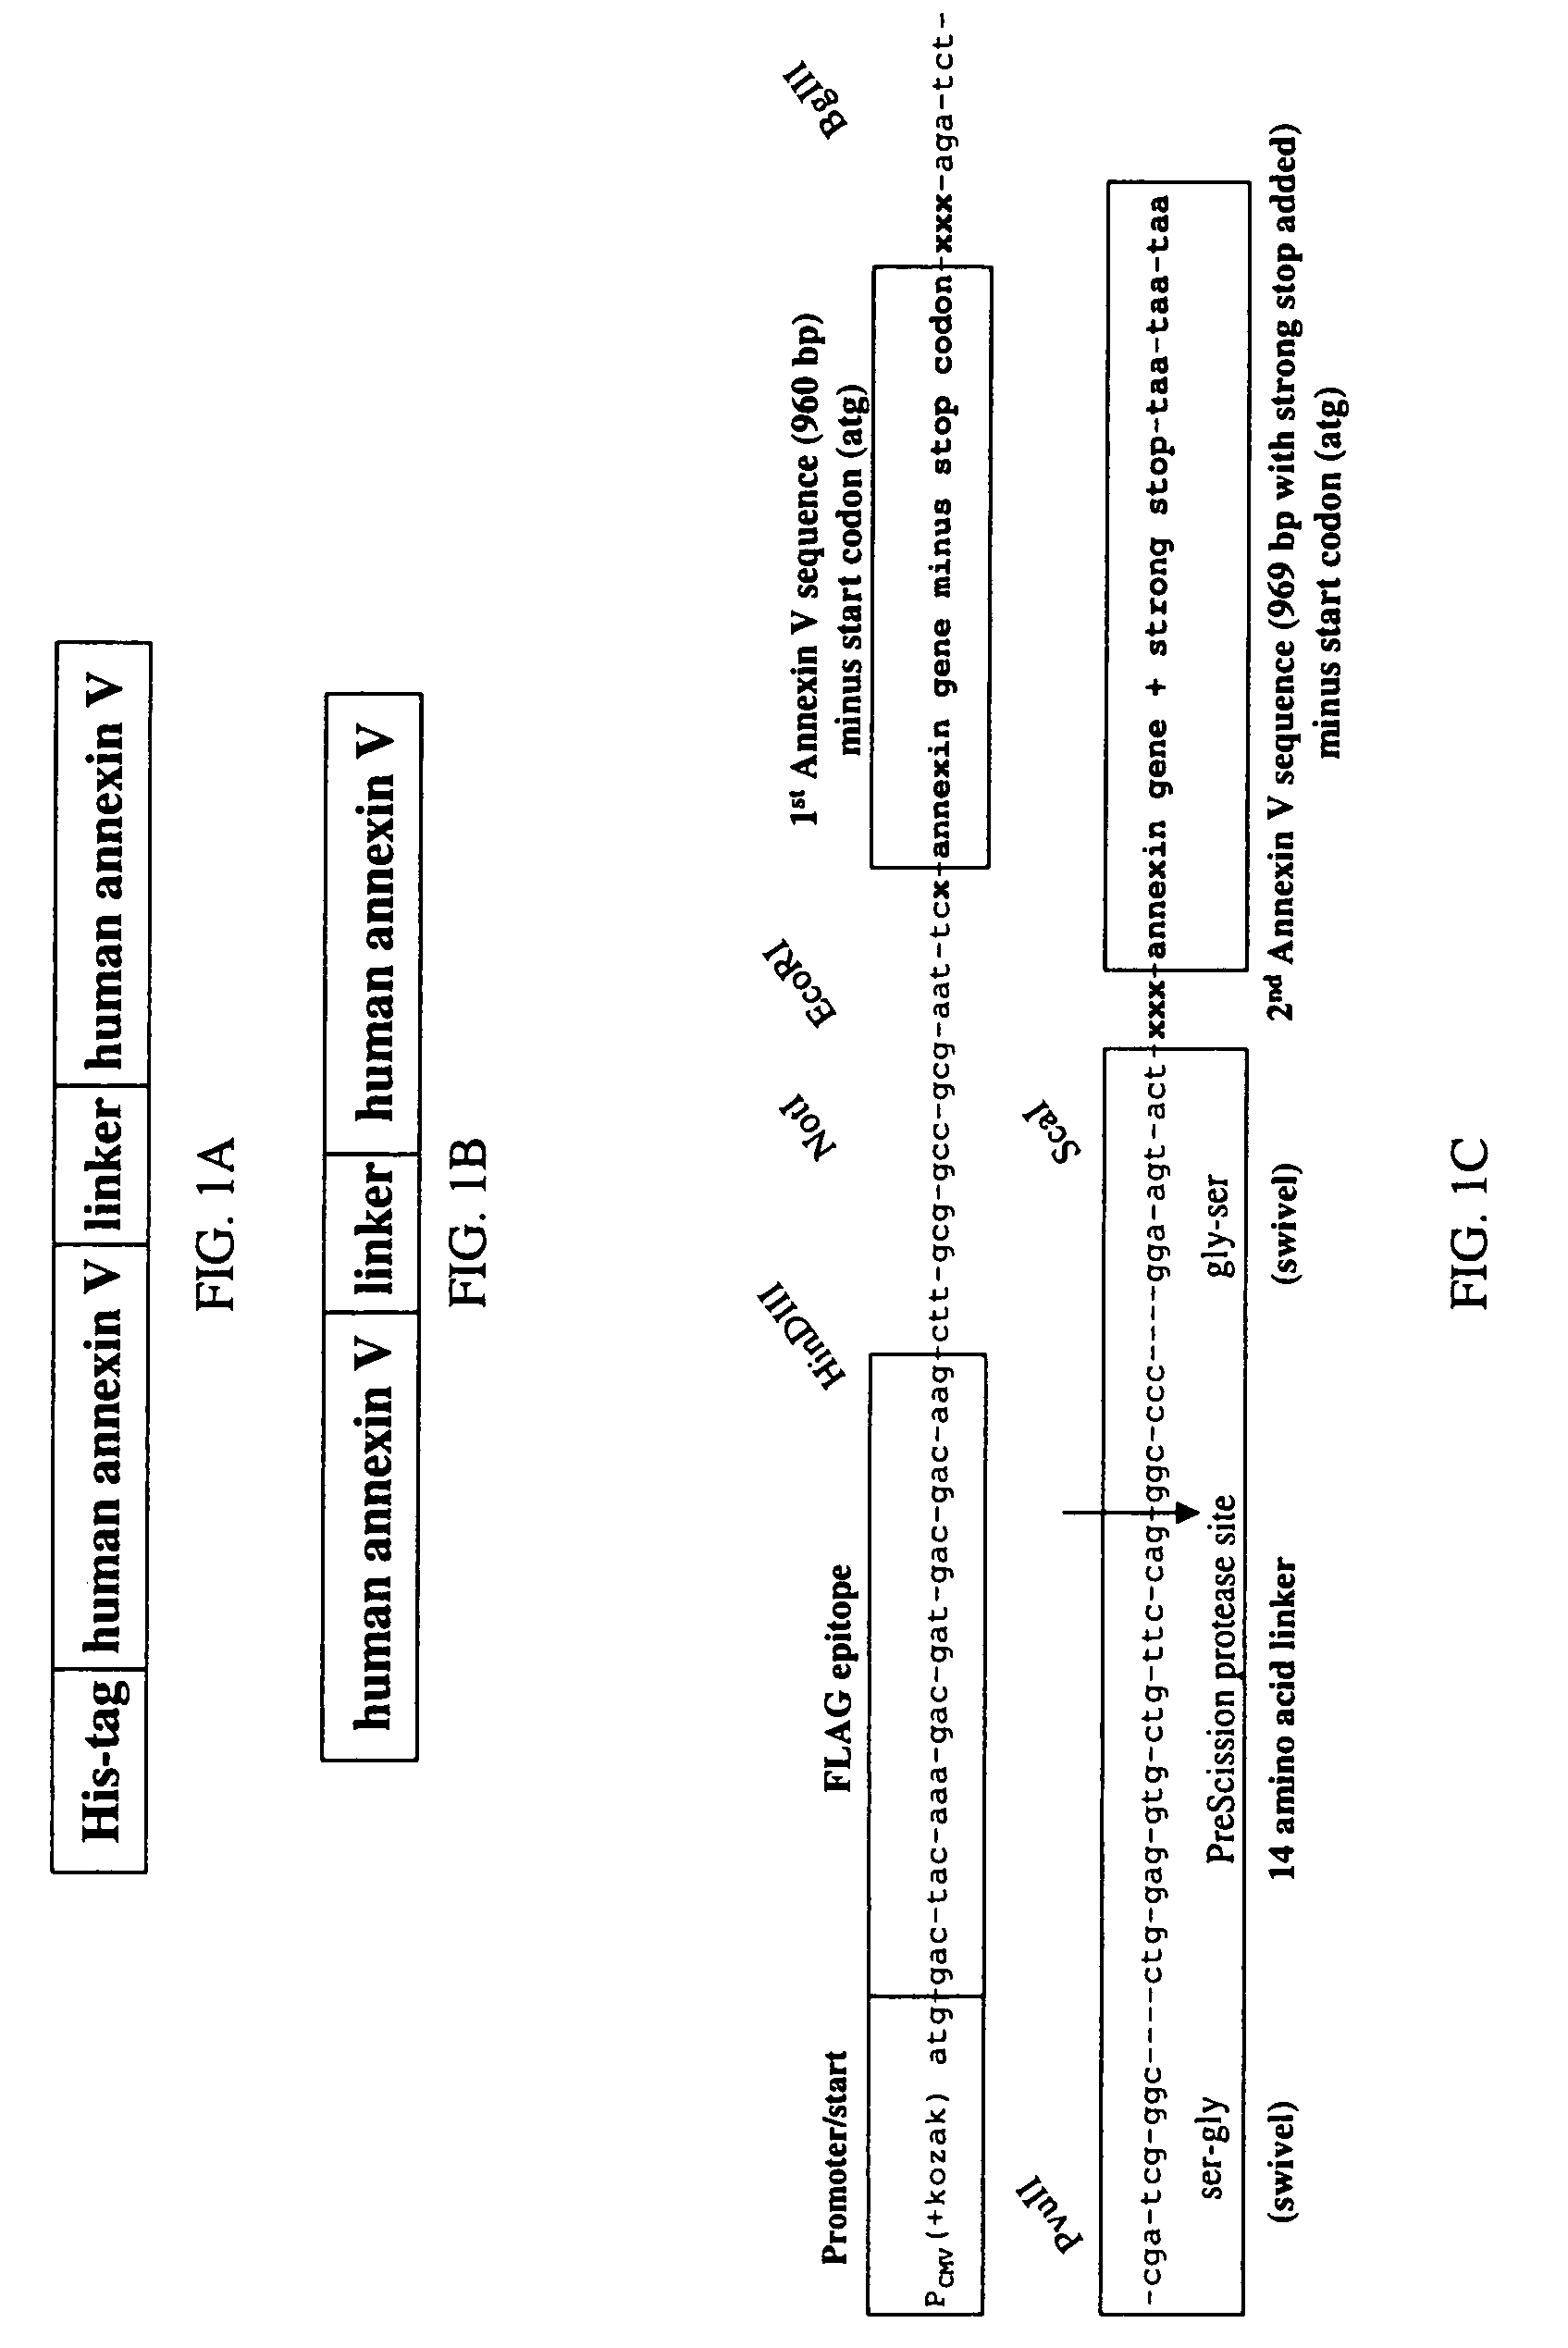 Modified annexin compositions and methods of using same